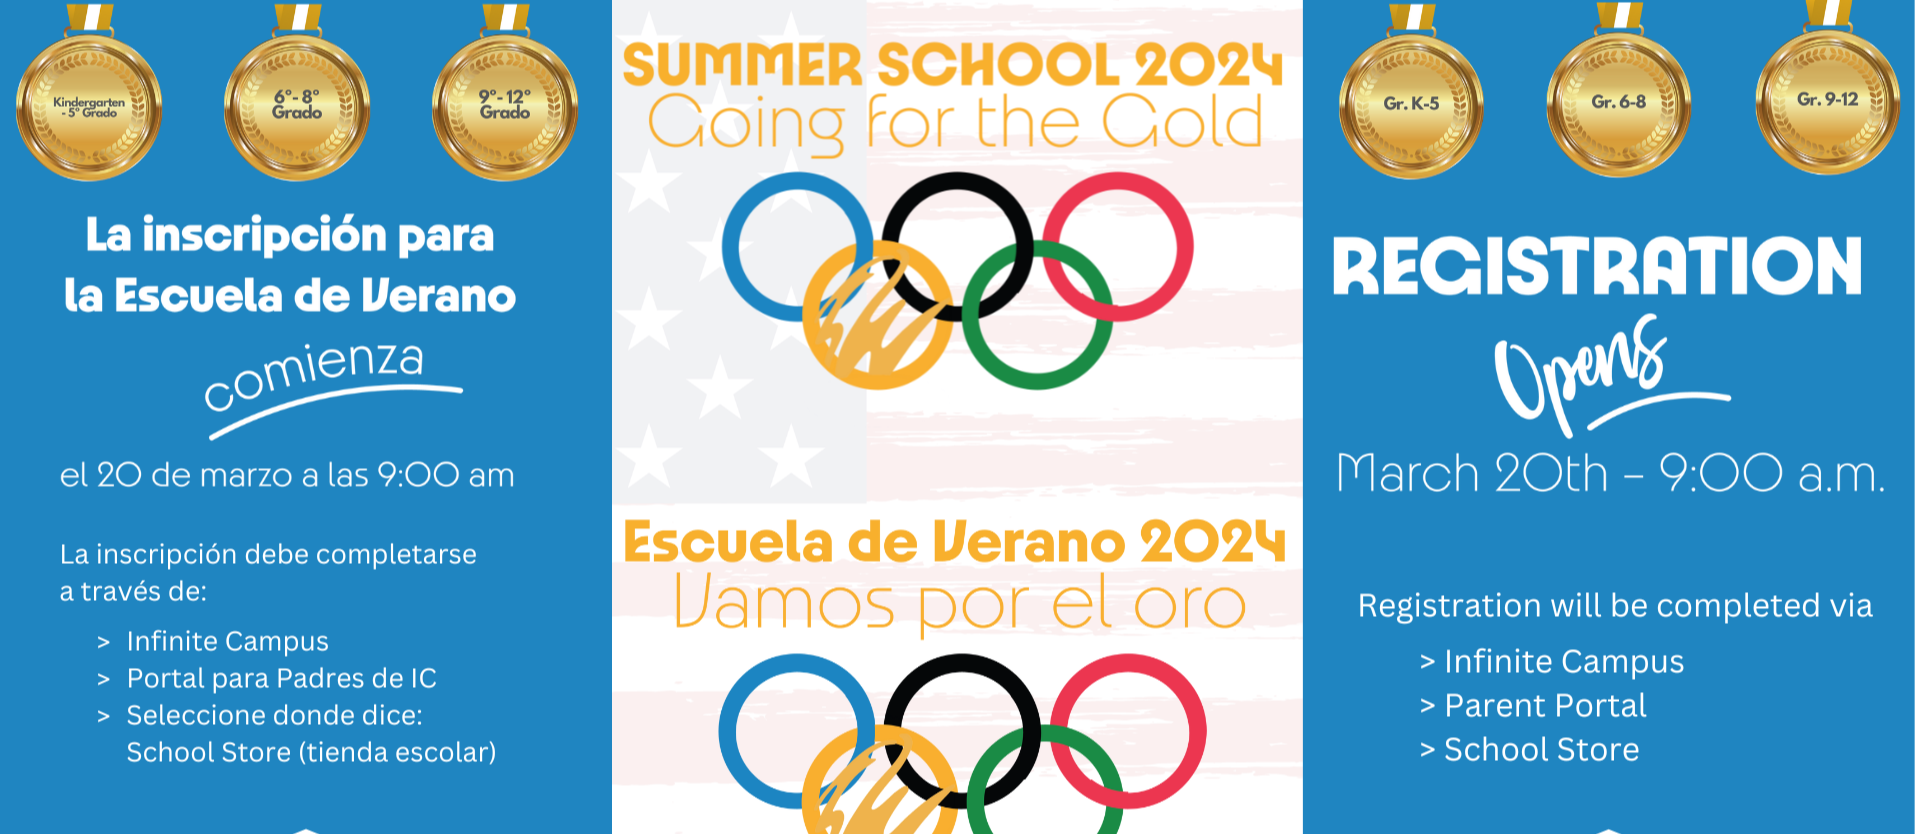 Summer School - Going for the Gold